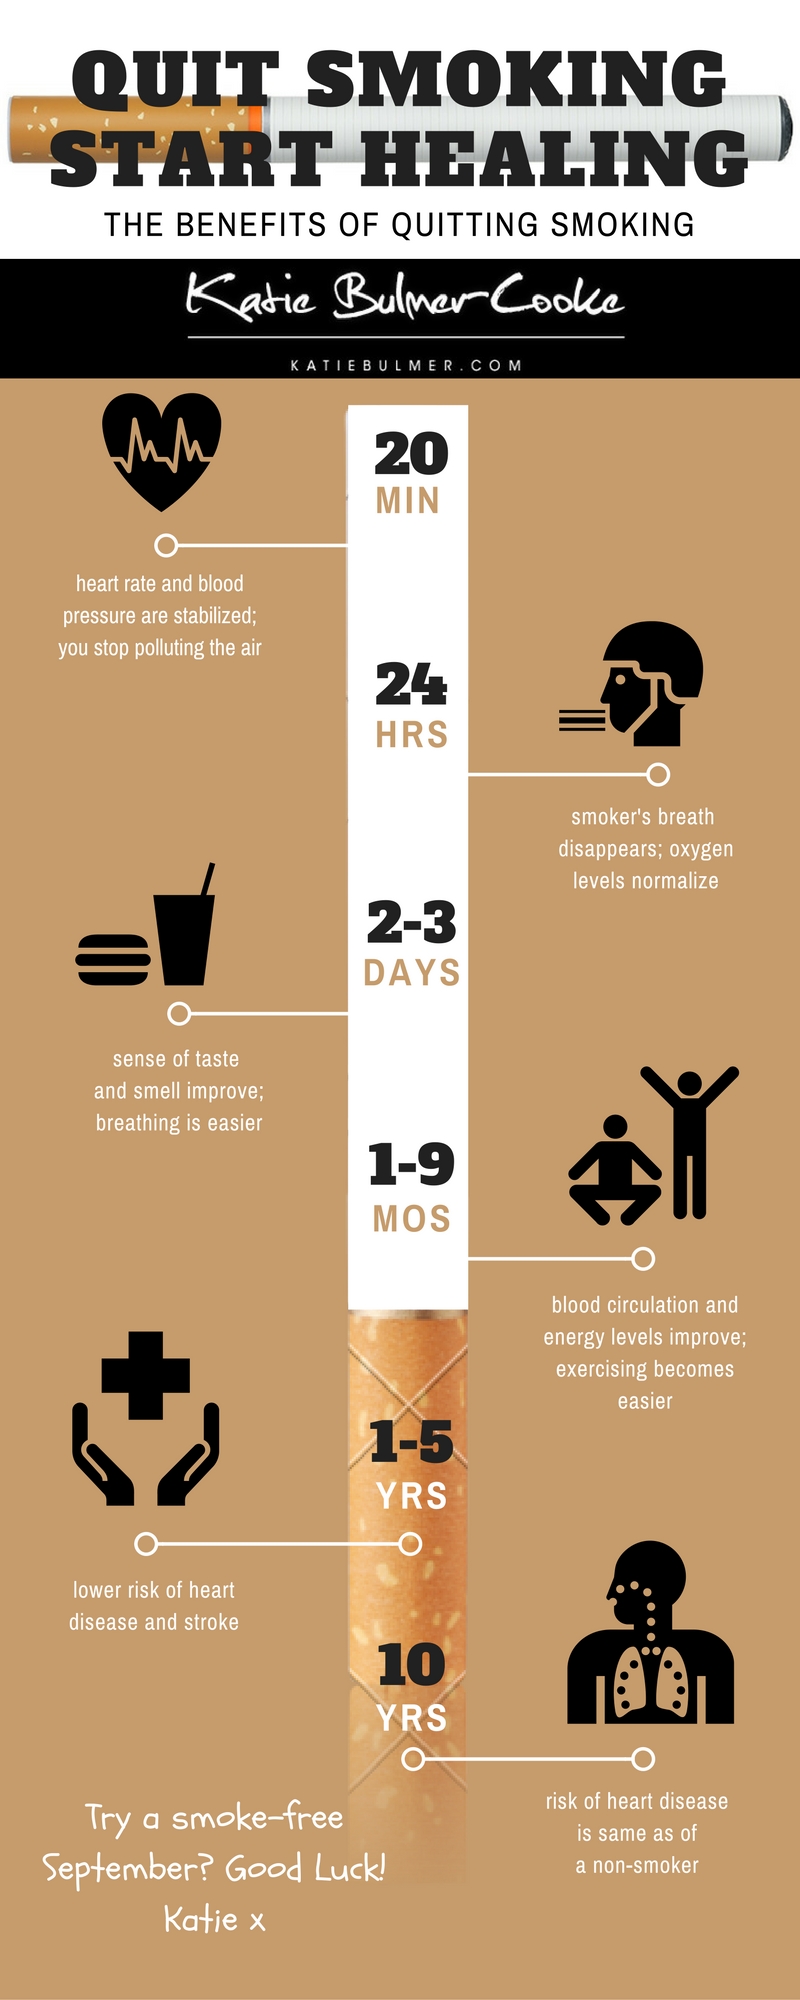 Stop Smoking - Benefits of Quitting - CardioSmart – American College of  Cardiology